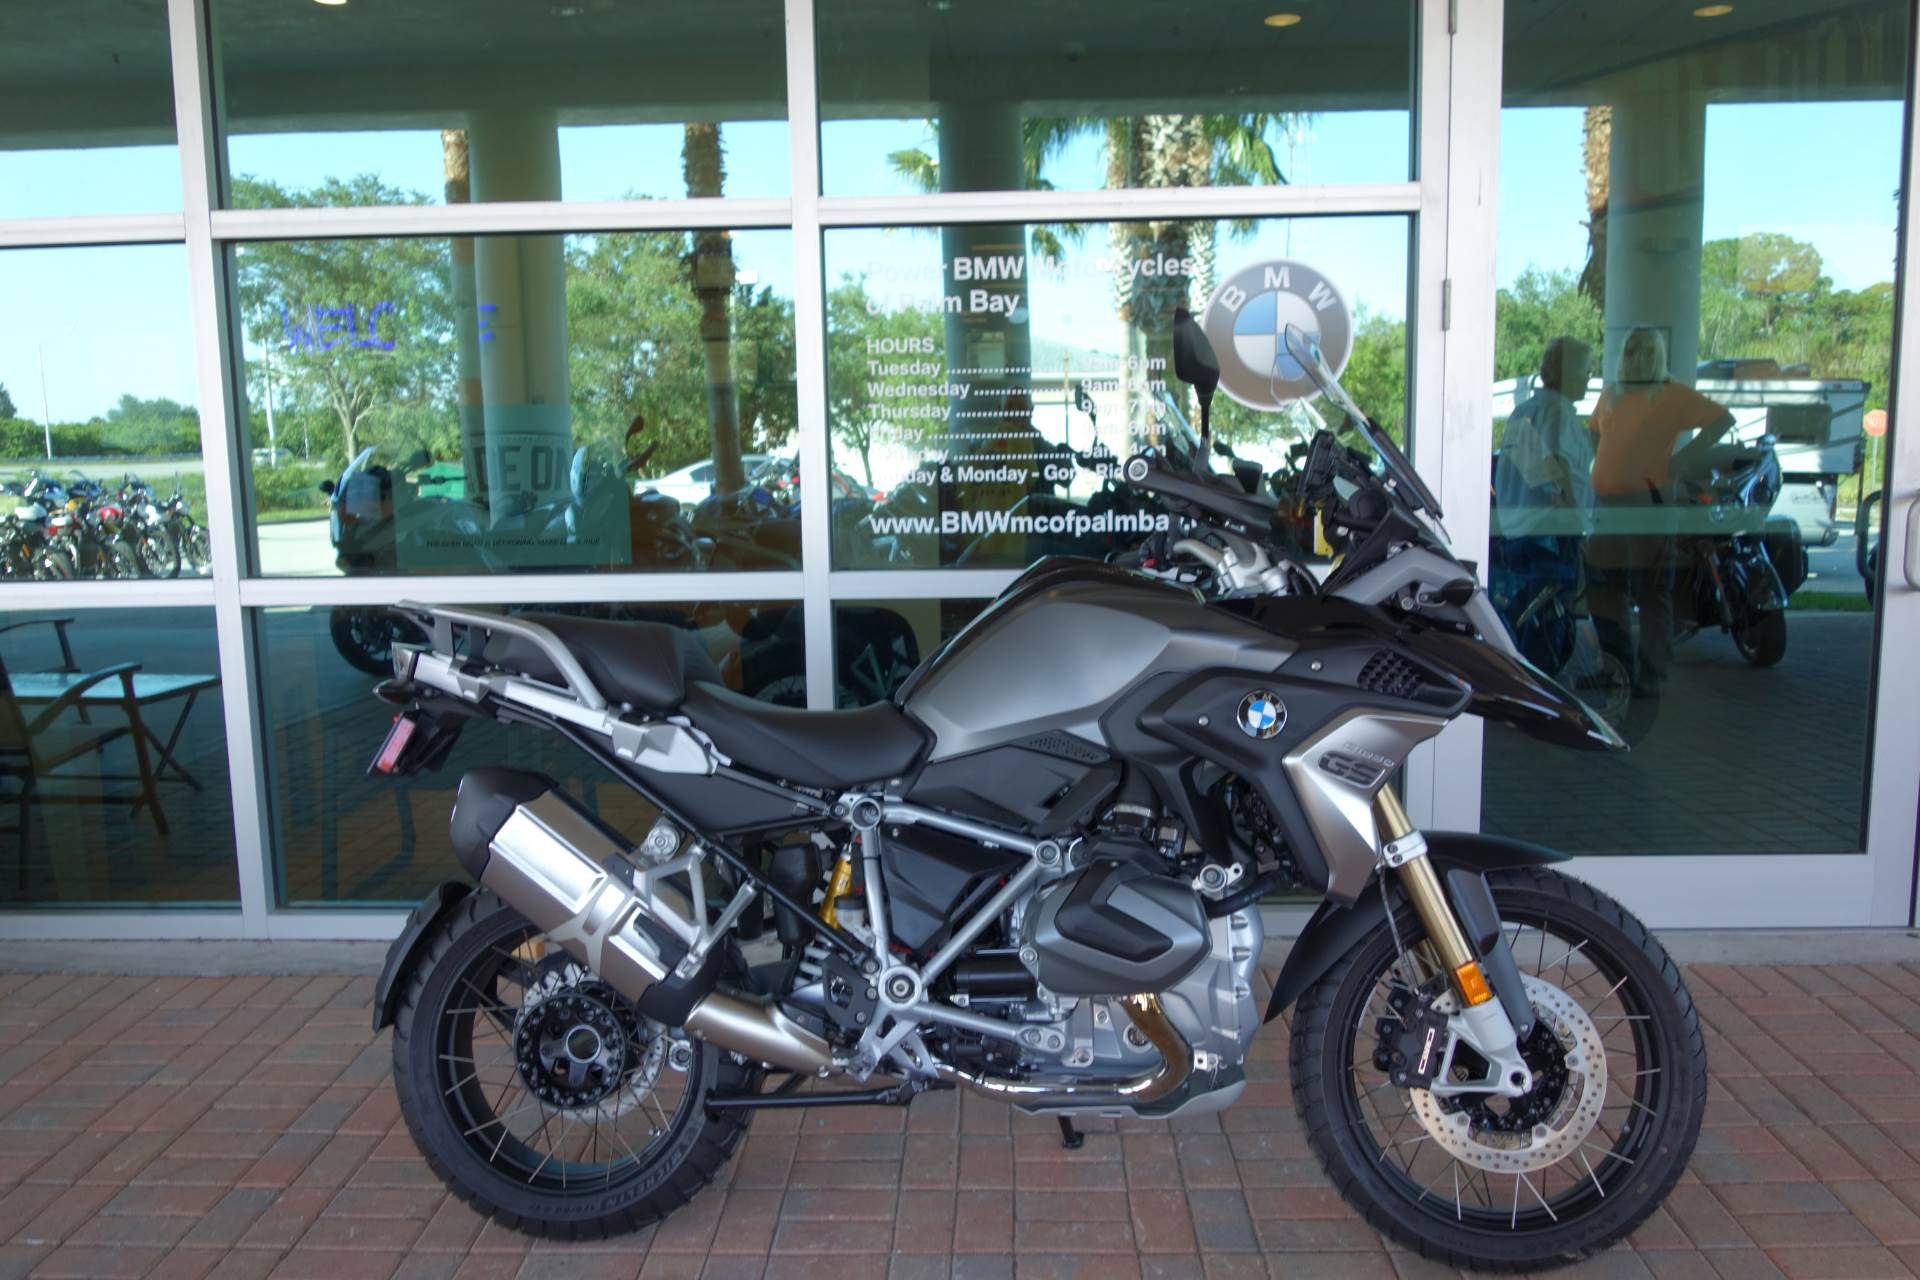 Bmw Motorcycle Repair East Bay - BMW USA Announces Opening Of BMW Motorcycles Of Concord - East